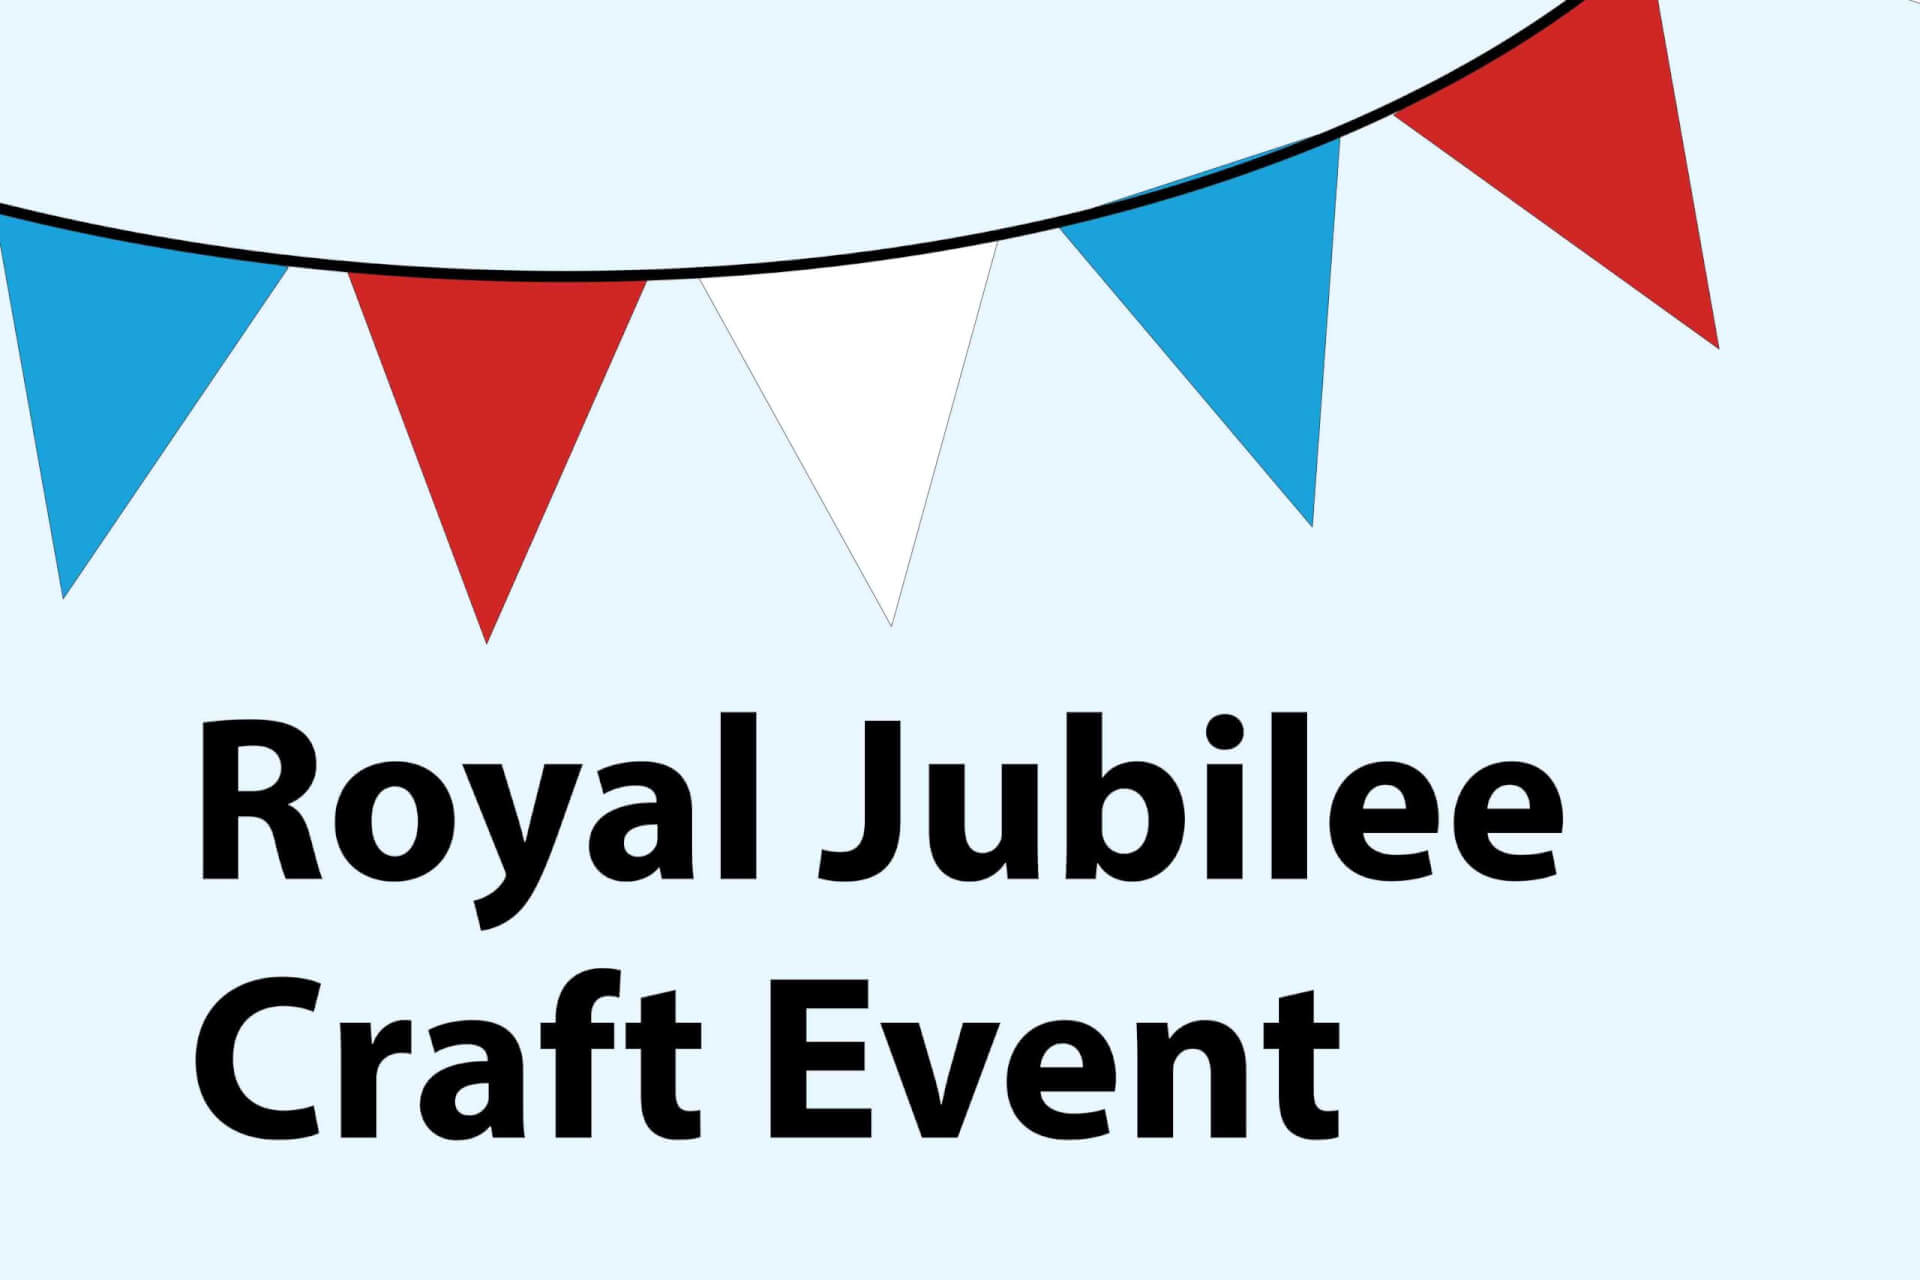 Royal Jubilee Craft Event